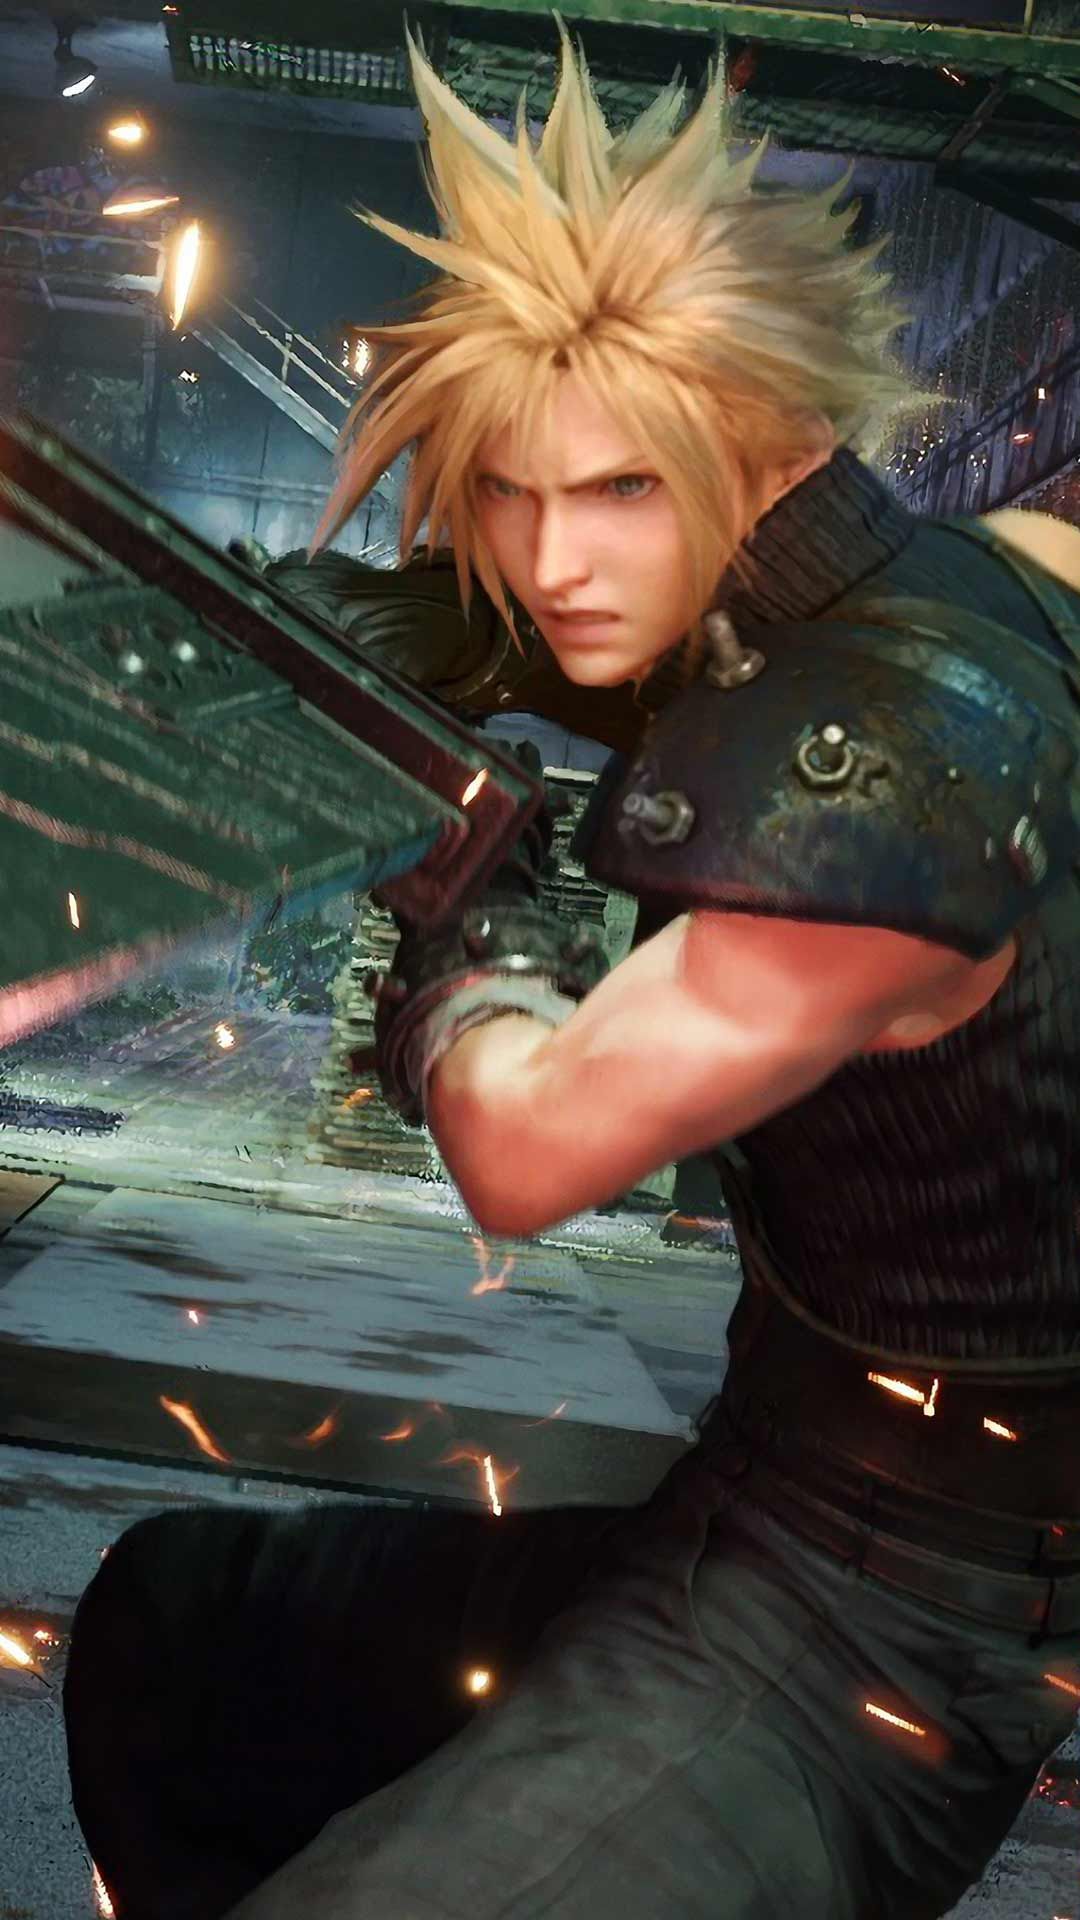 Final Fantasy 7 Remake wallpaper HD phone background PS4 game art poster logo on iPhone andro. Final fantasy vii cloud, Final fantasy, Final fantasy cloud strife